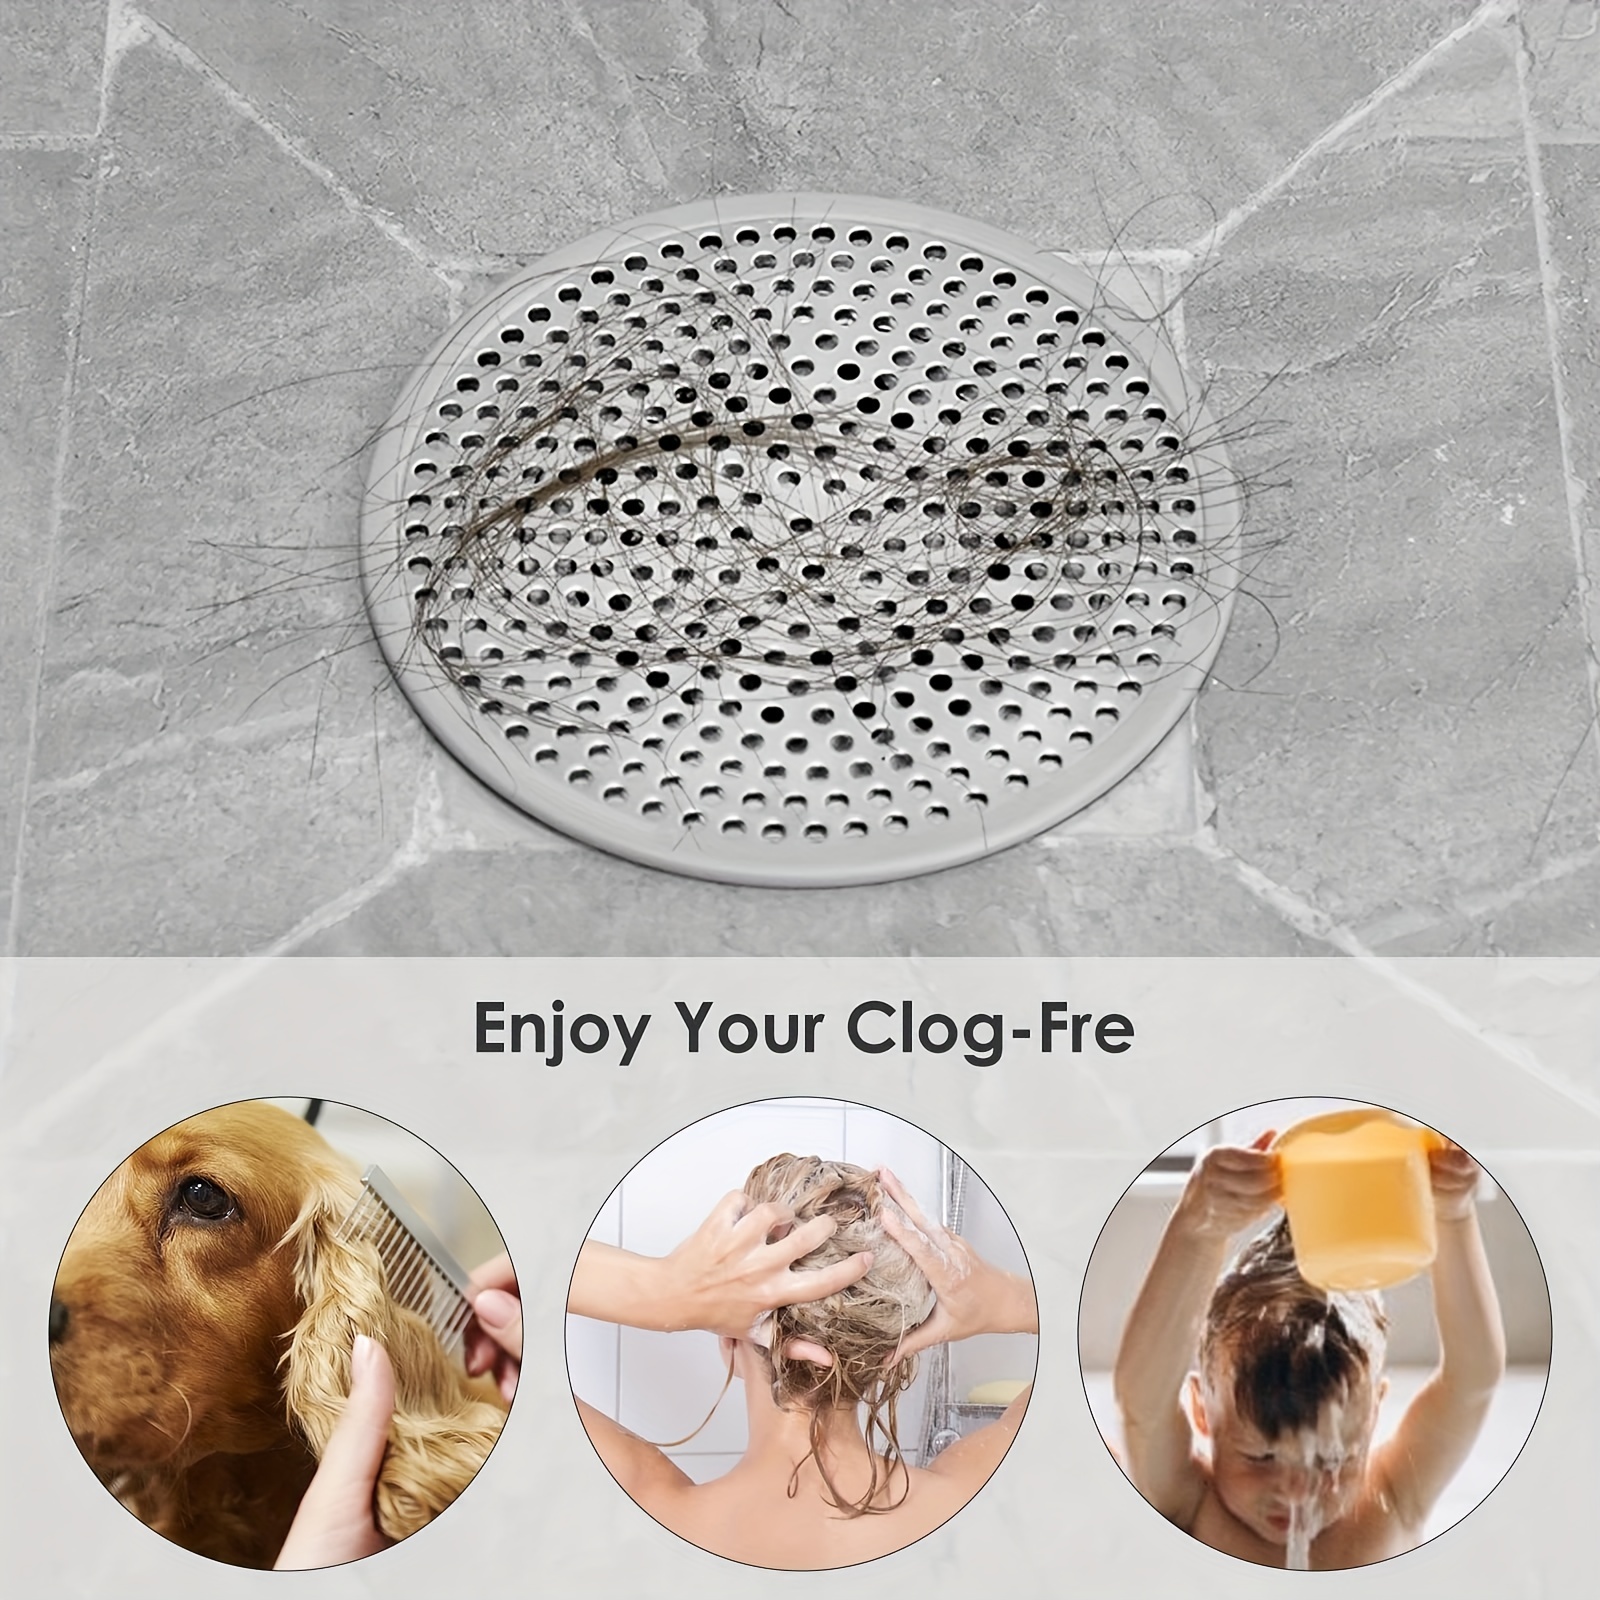 Shower Drain Hair Catcher Cover Strainer, Stall Drain Protector